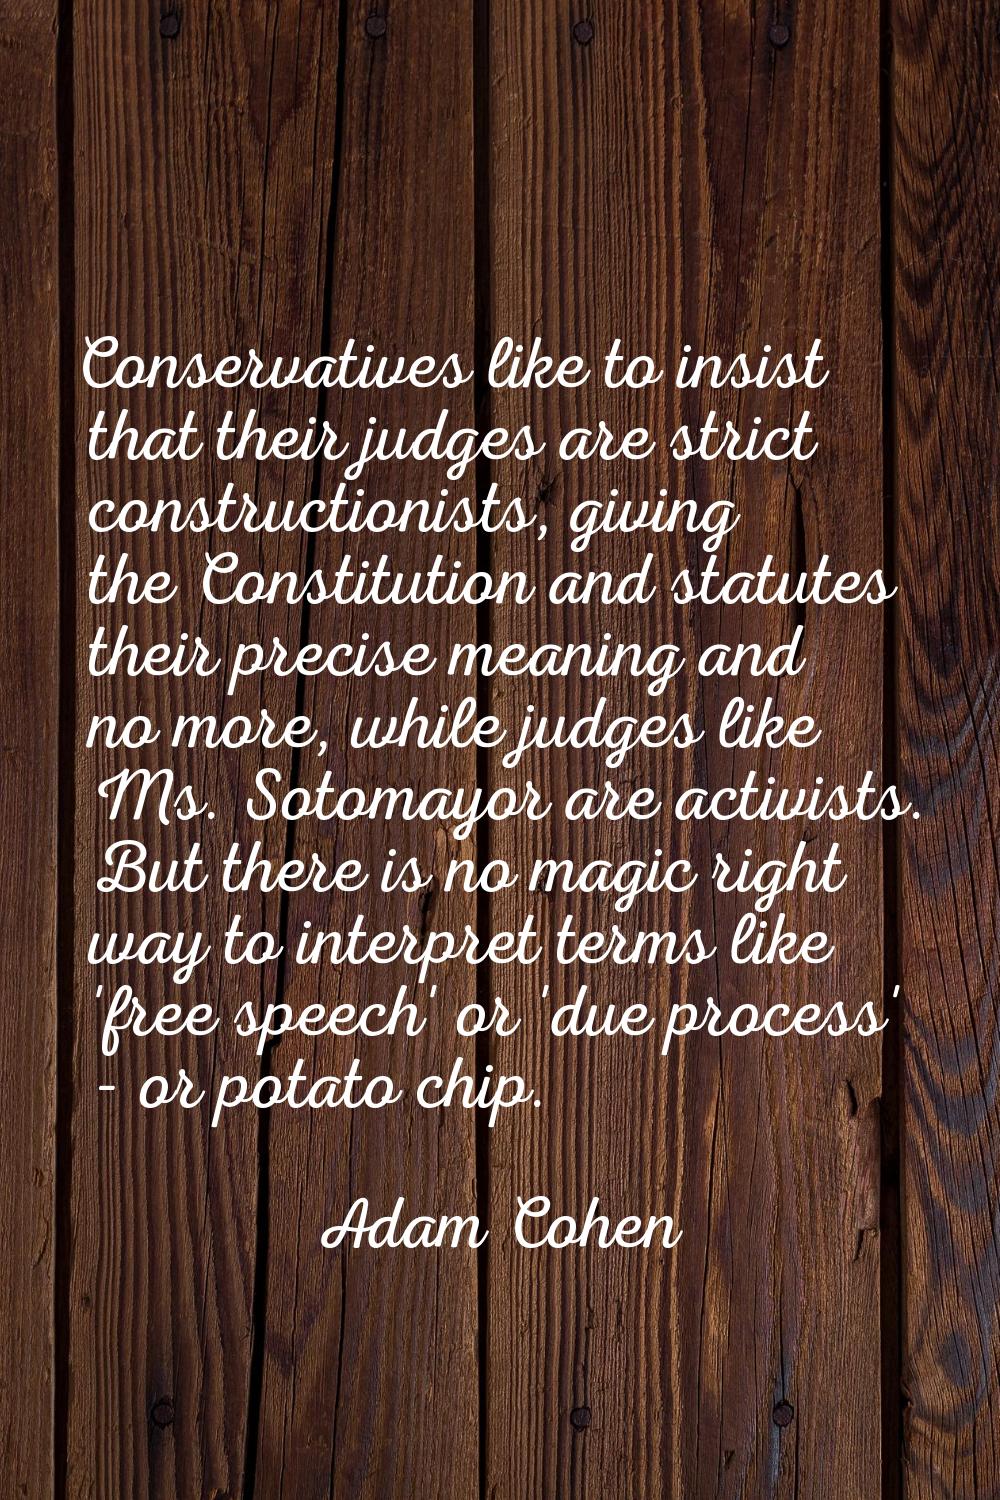 Conservatives like to insist that their judges are strict constructionists, giving the Constitution